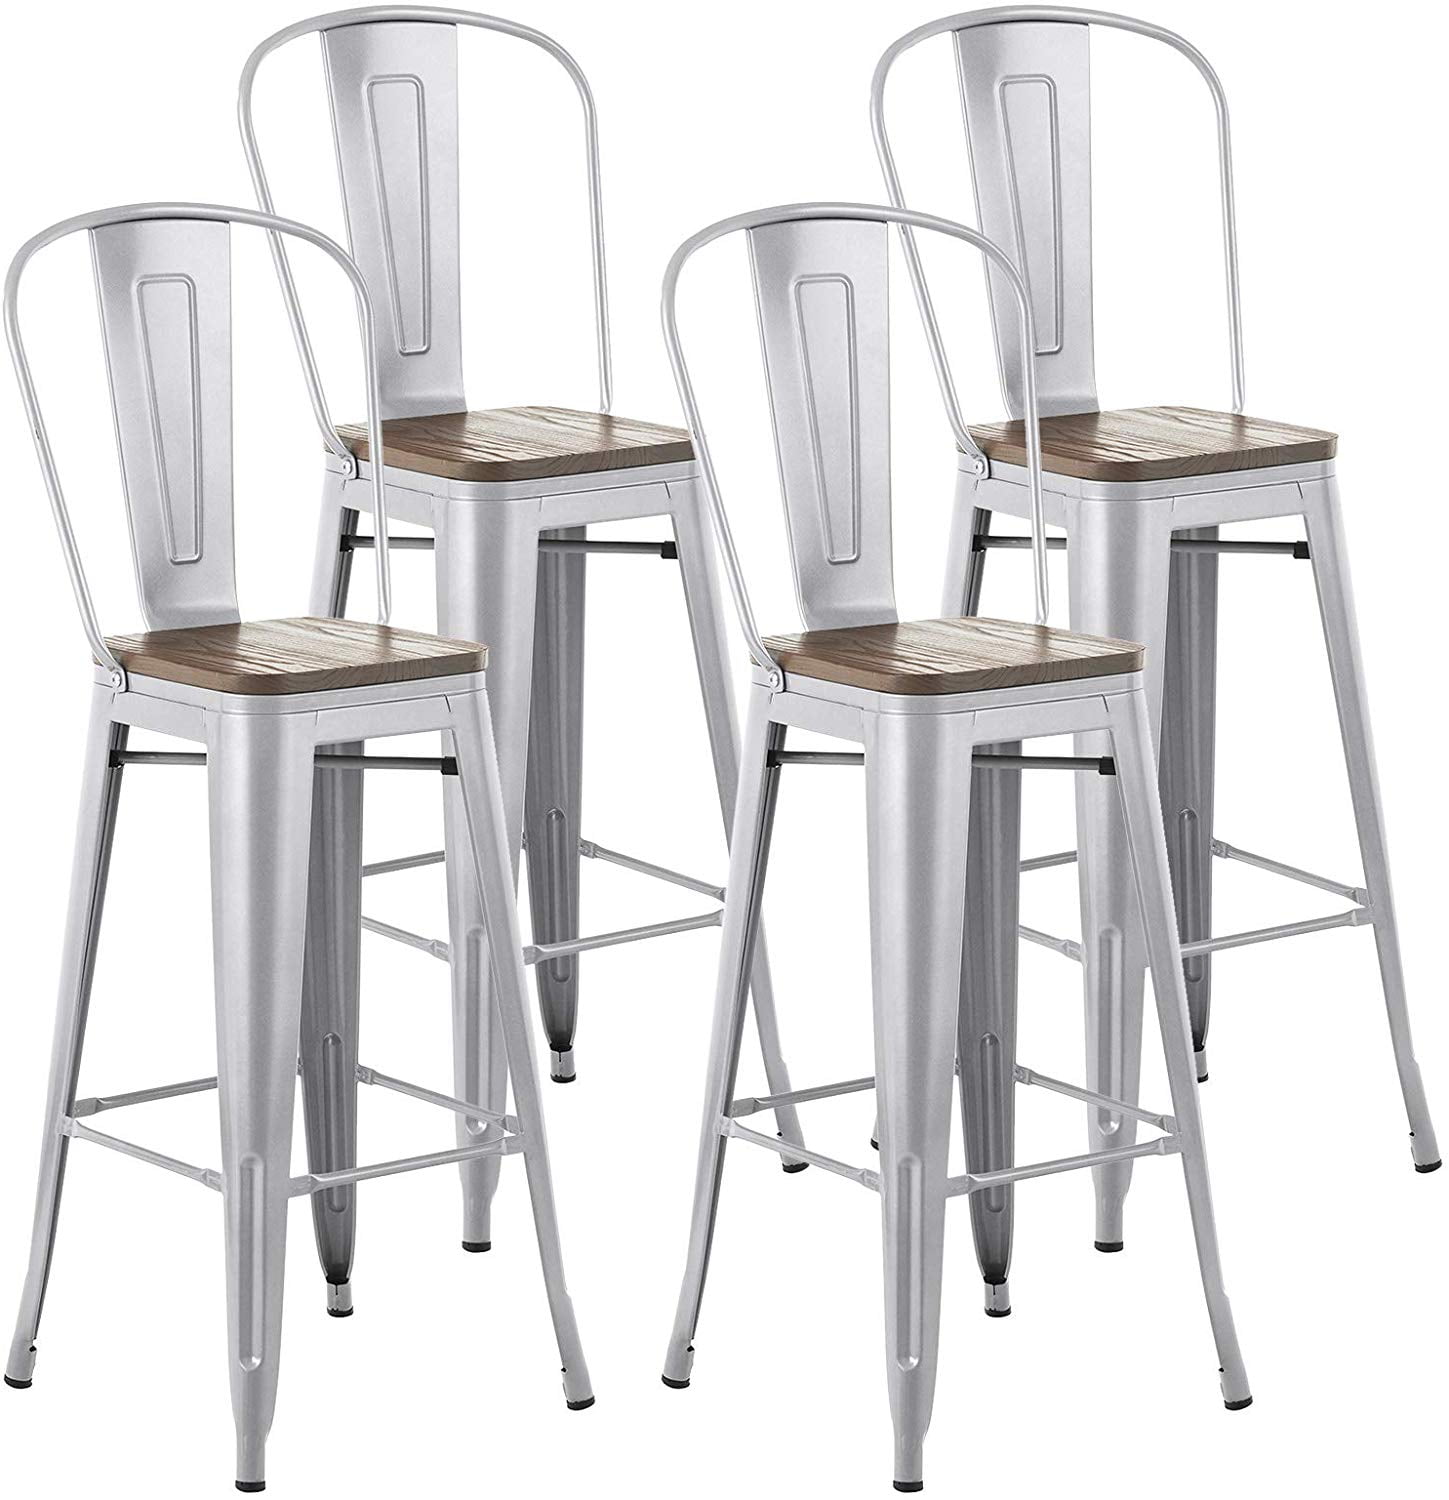 Mecor Metal Bar Stools Set Of 4 With, 30 Inch Bar Stools Without Back